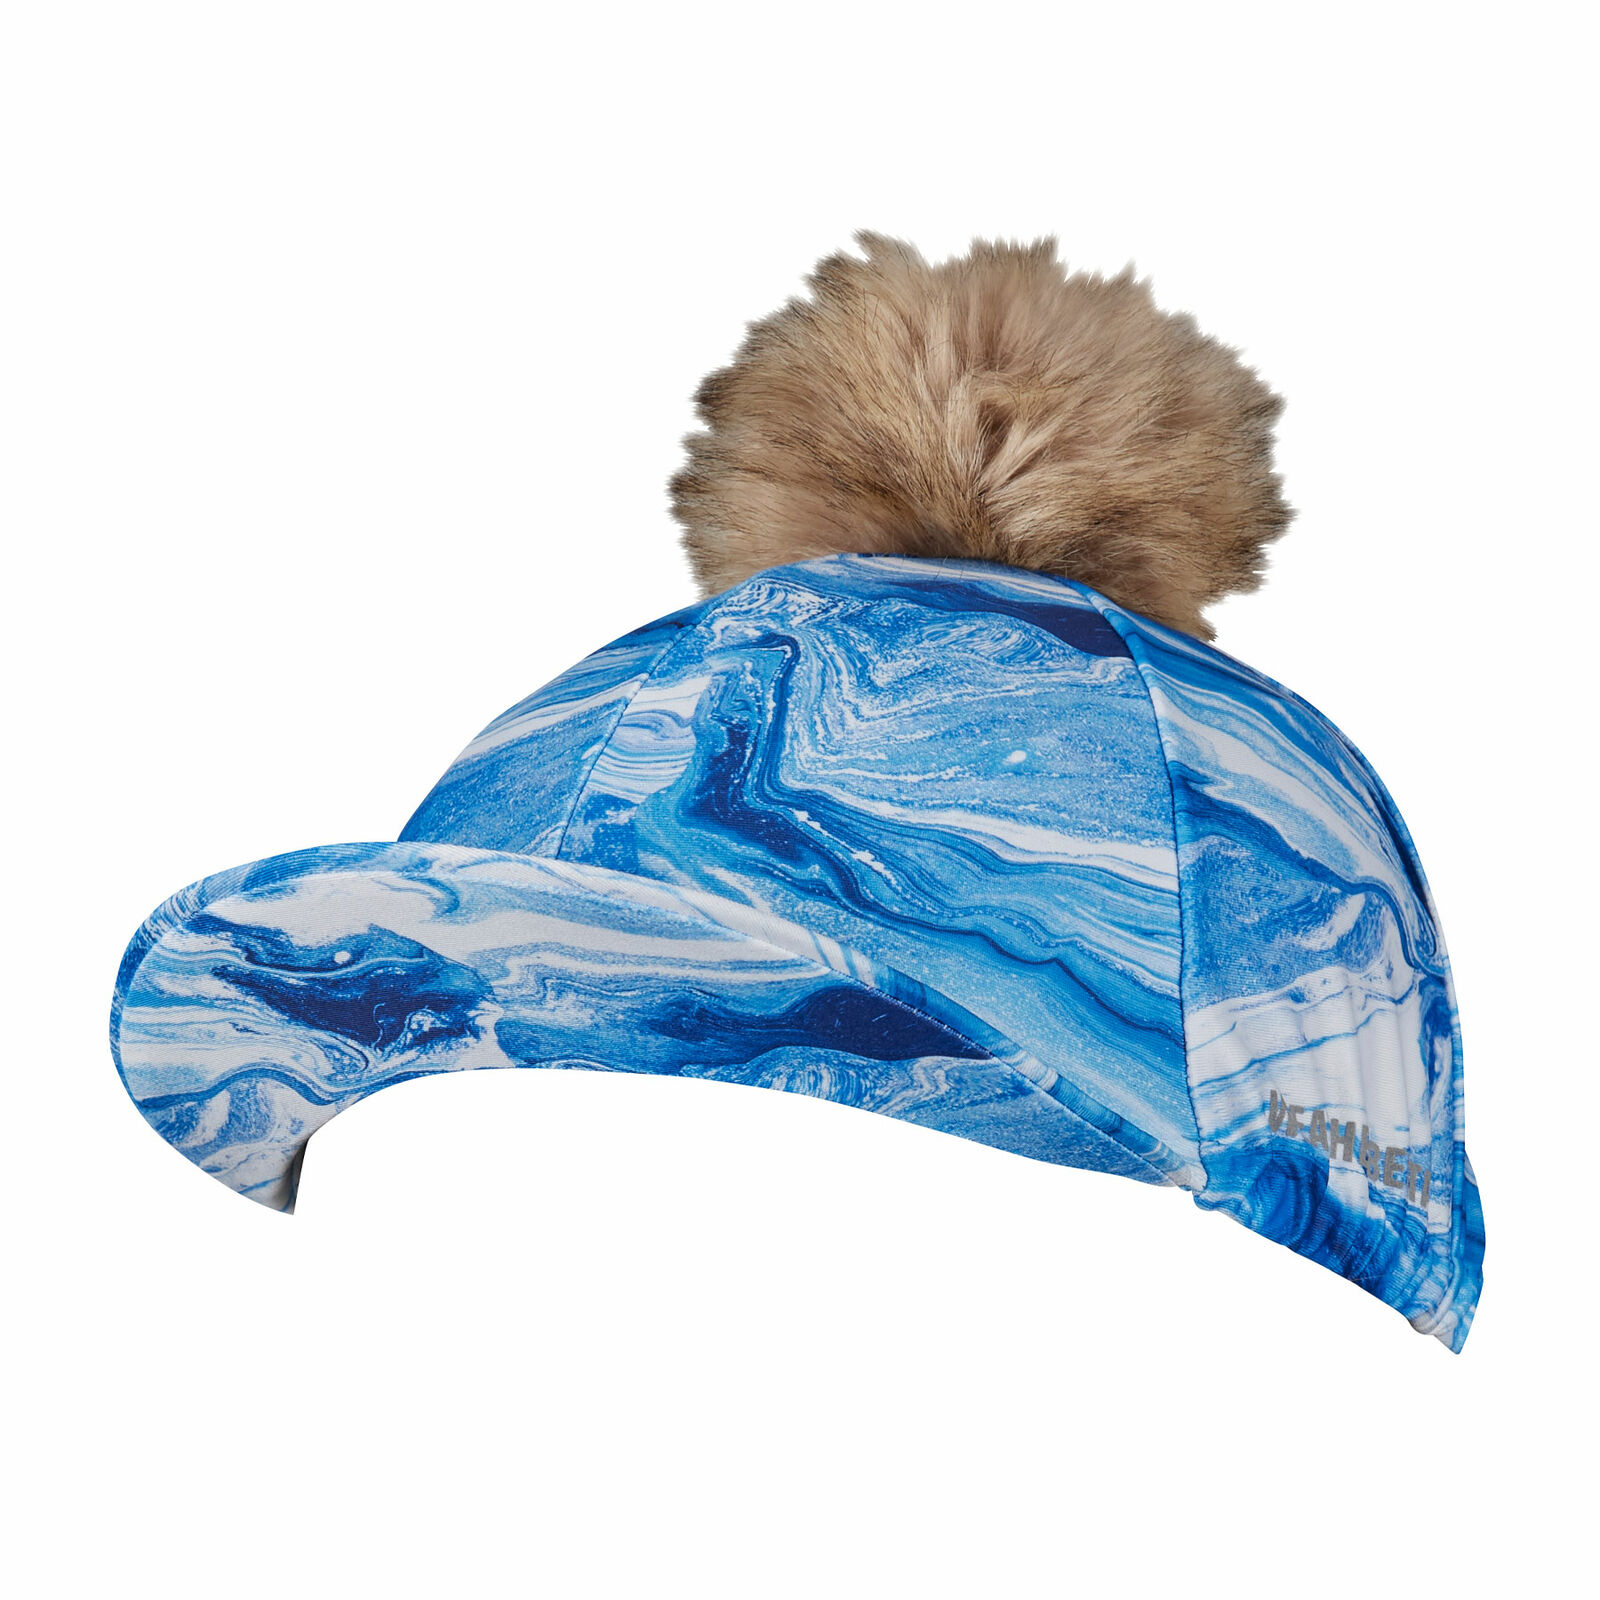 Weatherbeeta Silk Safety Wear Hat Cover - Blue Swirl Marble Print One Size